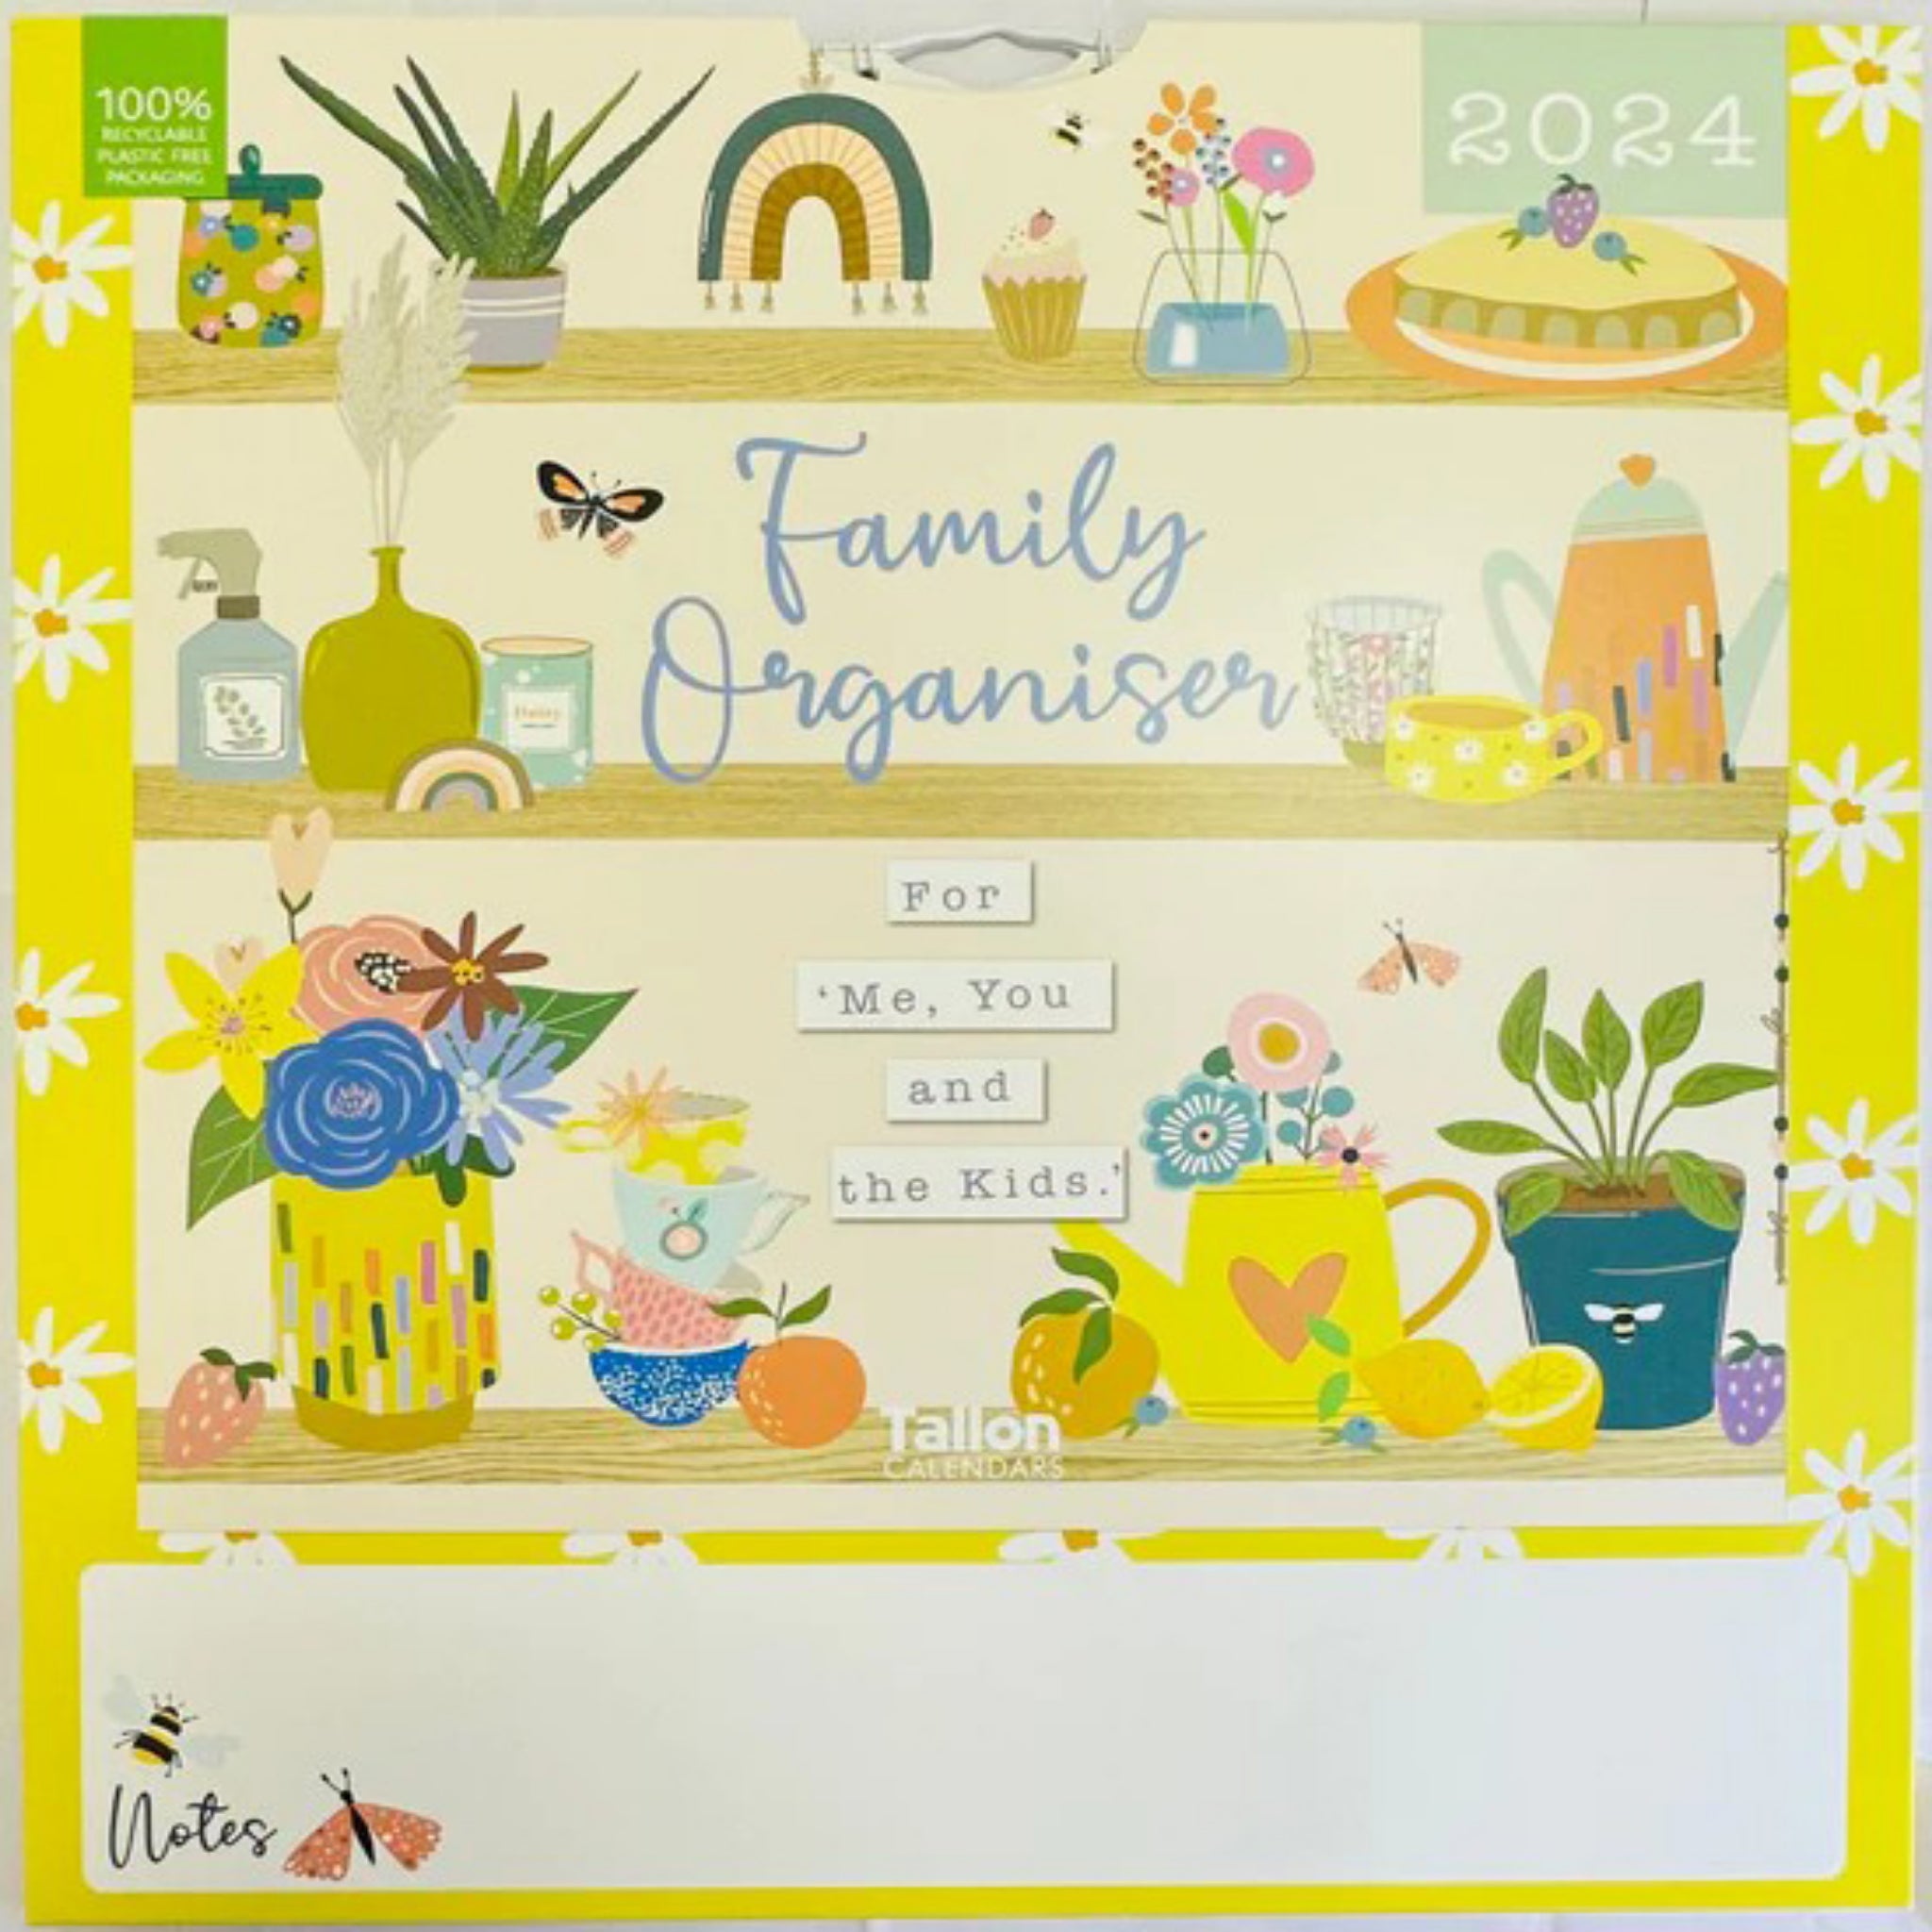 2024 Mum's Family Organizer, Week-to-View with 6 Columns, Wall Planner  Calendar by Arpan